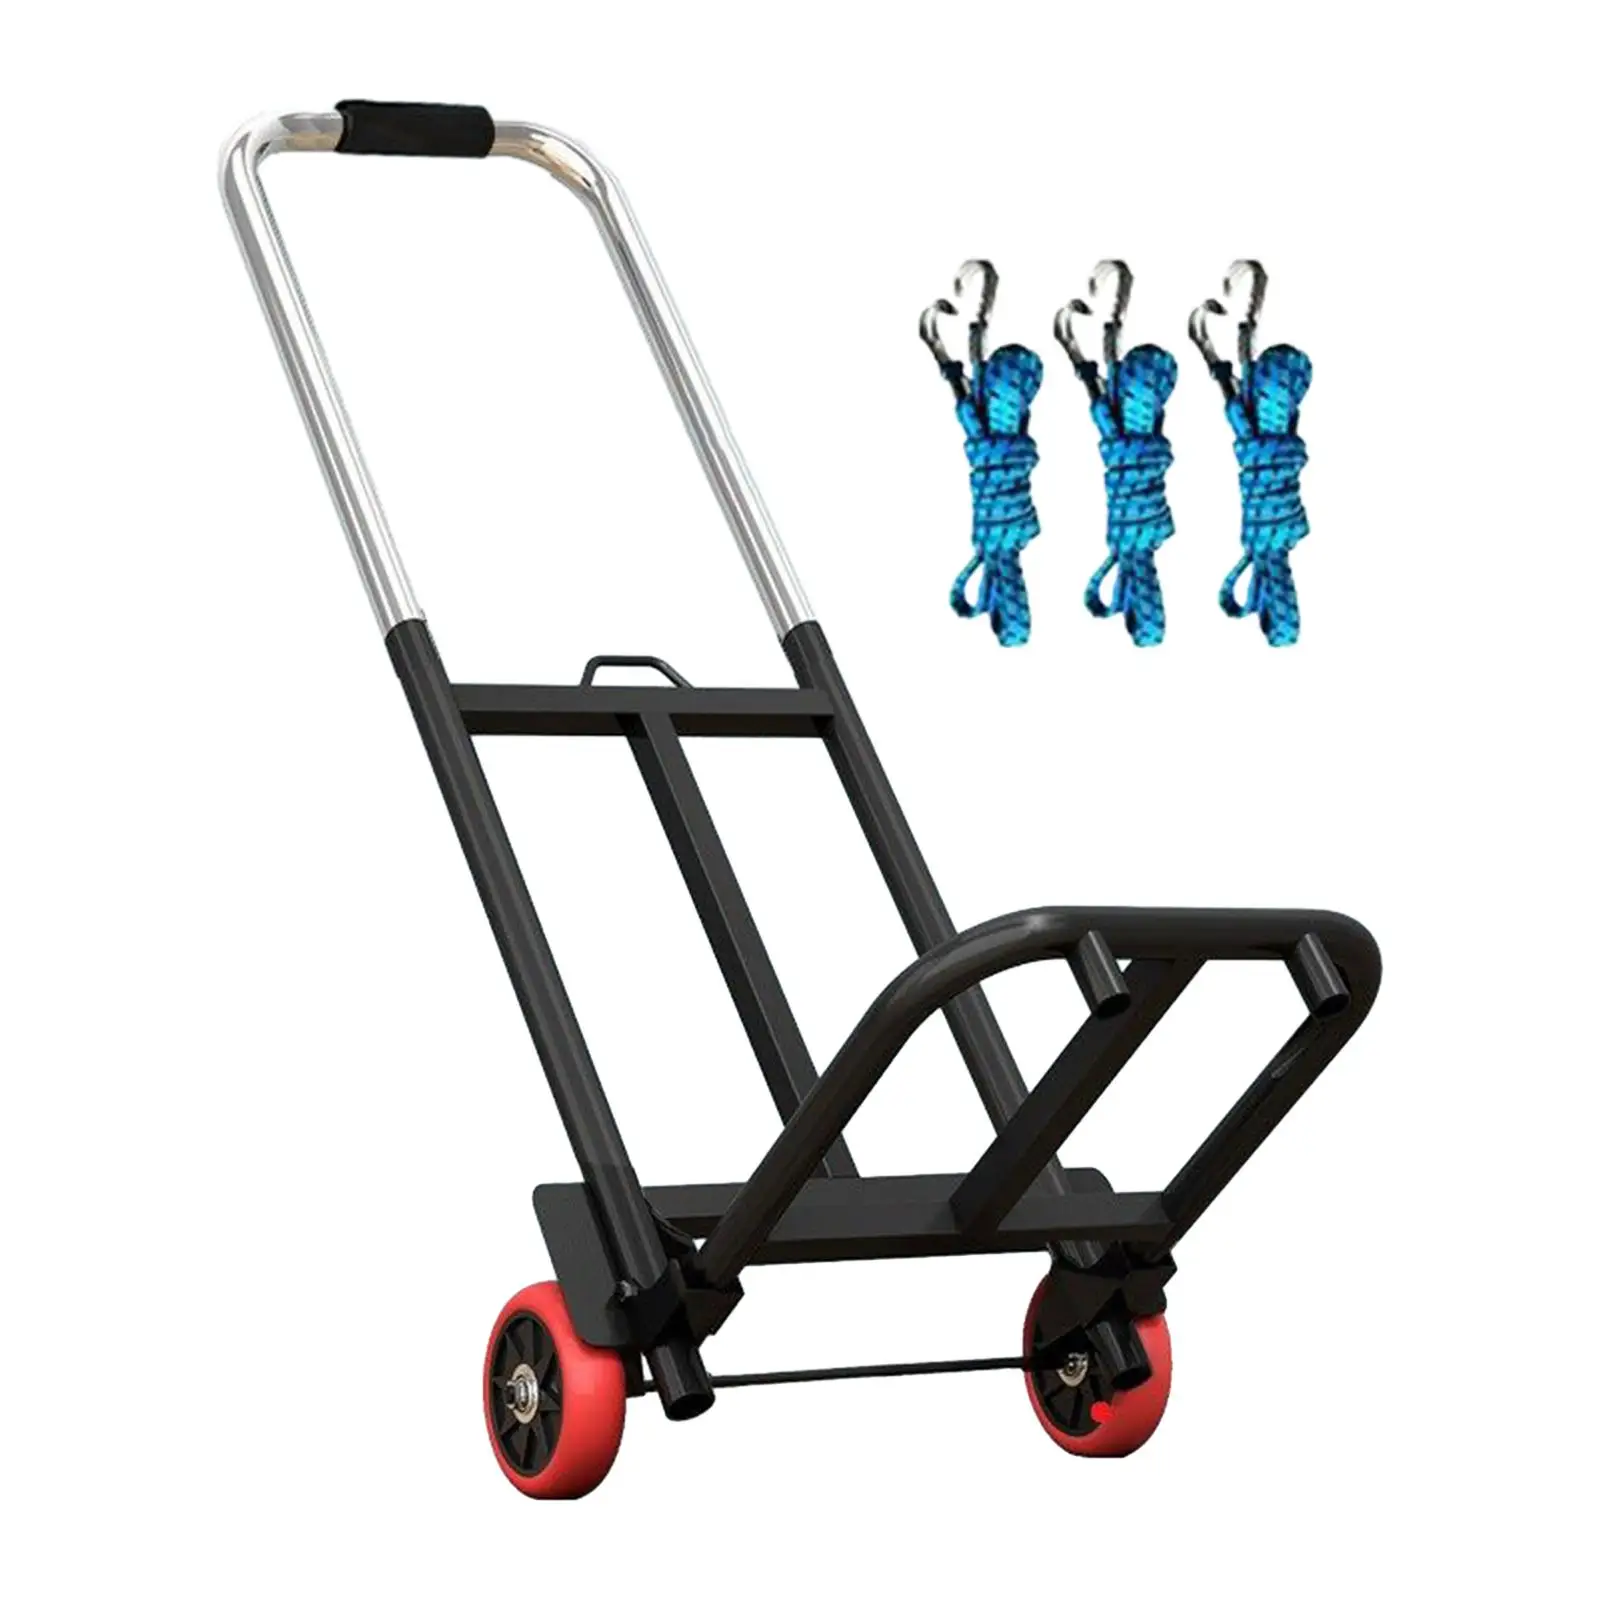 Folding Hand Truck Luggage Trolley Cart Sturdy Telescopic 50cm-80cm Telescoping Handle with 3 Elastic Ropes for Travelers